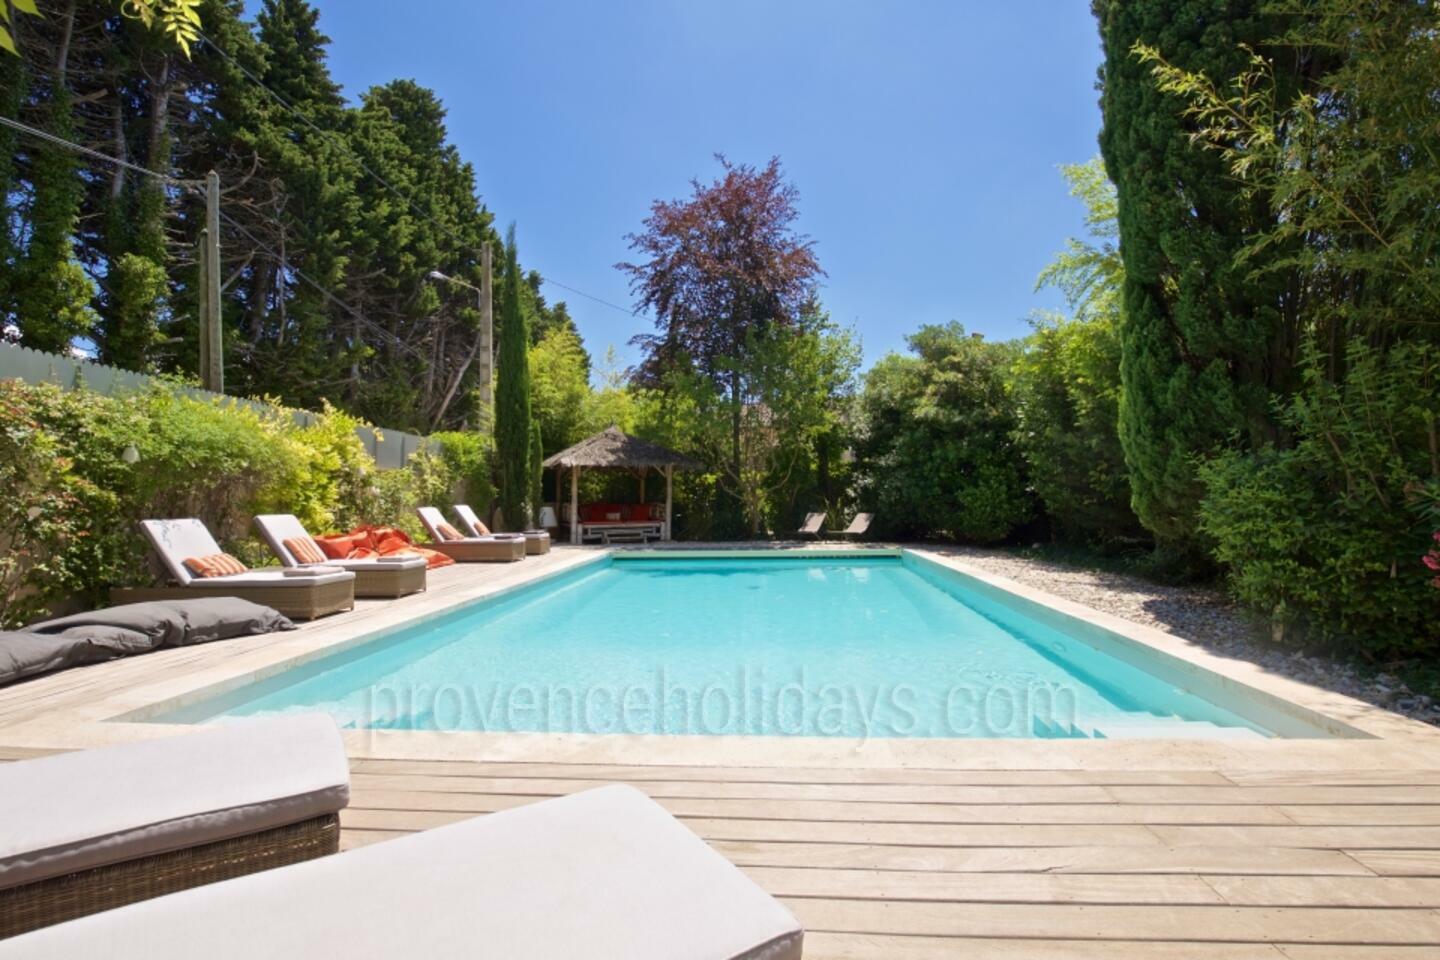 Holiday Home with Indoor and Outdoor Pools in the Alpilles 1 - La Maison des Alpilles: Villa: Pool